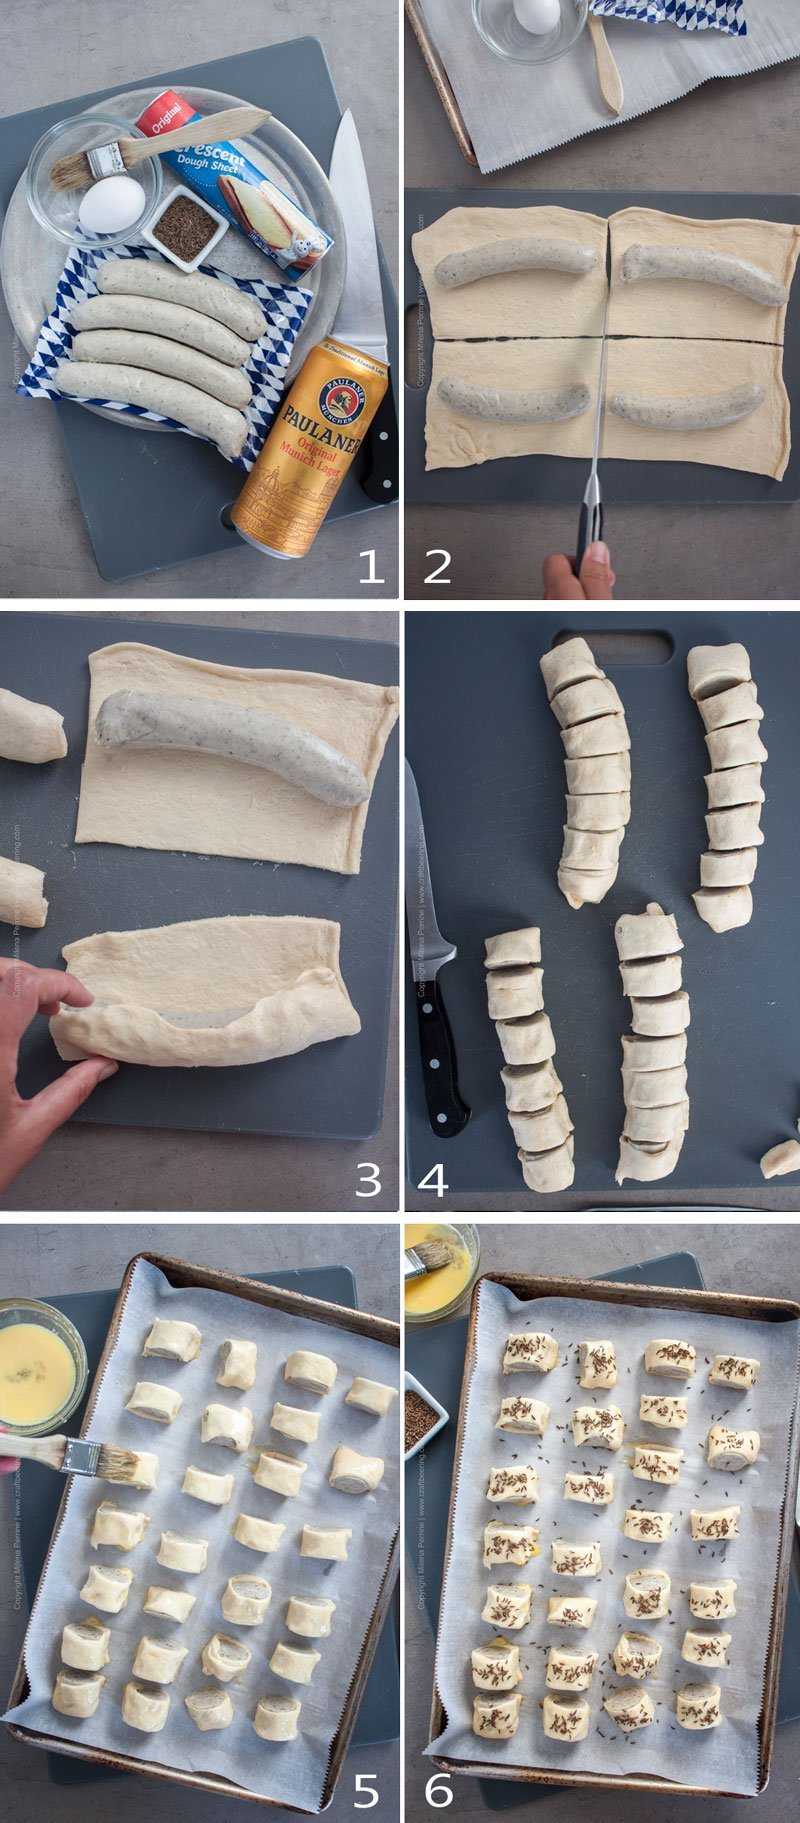 How to make sausage bites step by step image grid